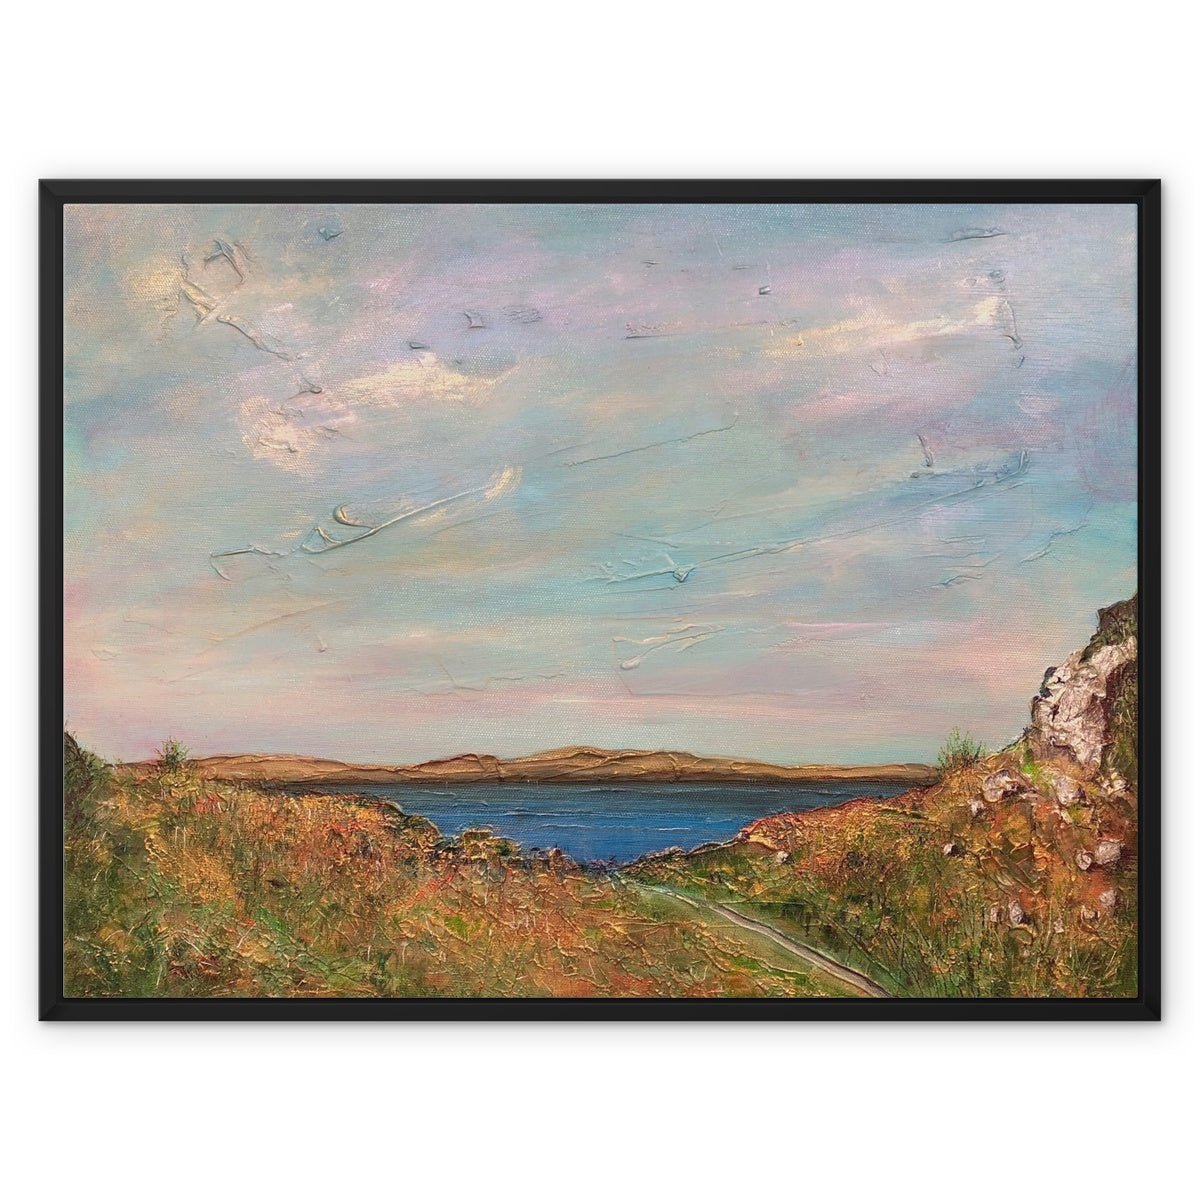 Jura From Crinan Painting | Framed Canvas From Scotland-Floating Framed Canvas Prints-Hebridean Islands Art Gallery-32"x24"-Black Frame-Paintings, Prints, Homeware, Art Gifts From Scotland By Scottish Artist Kevin Hunter